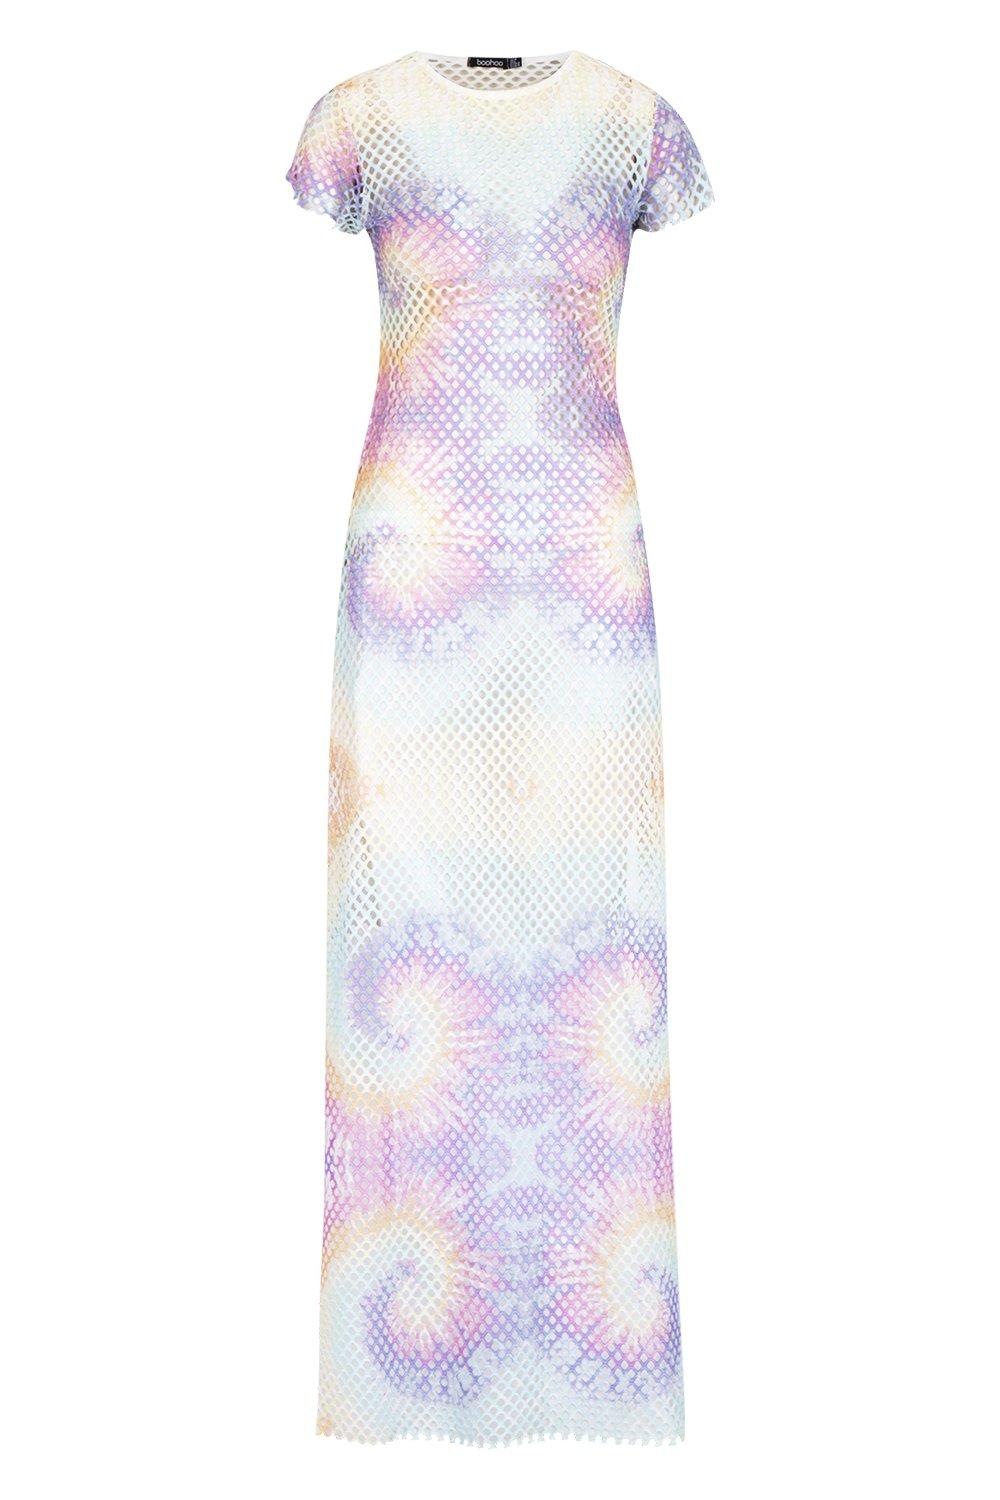 And Now This Tie-Dye Mesh Dress - Macy's